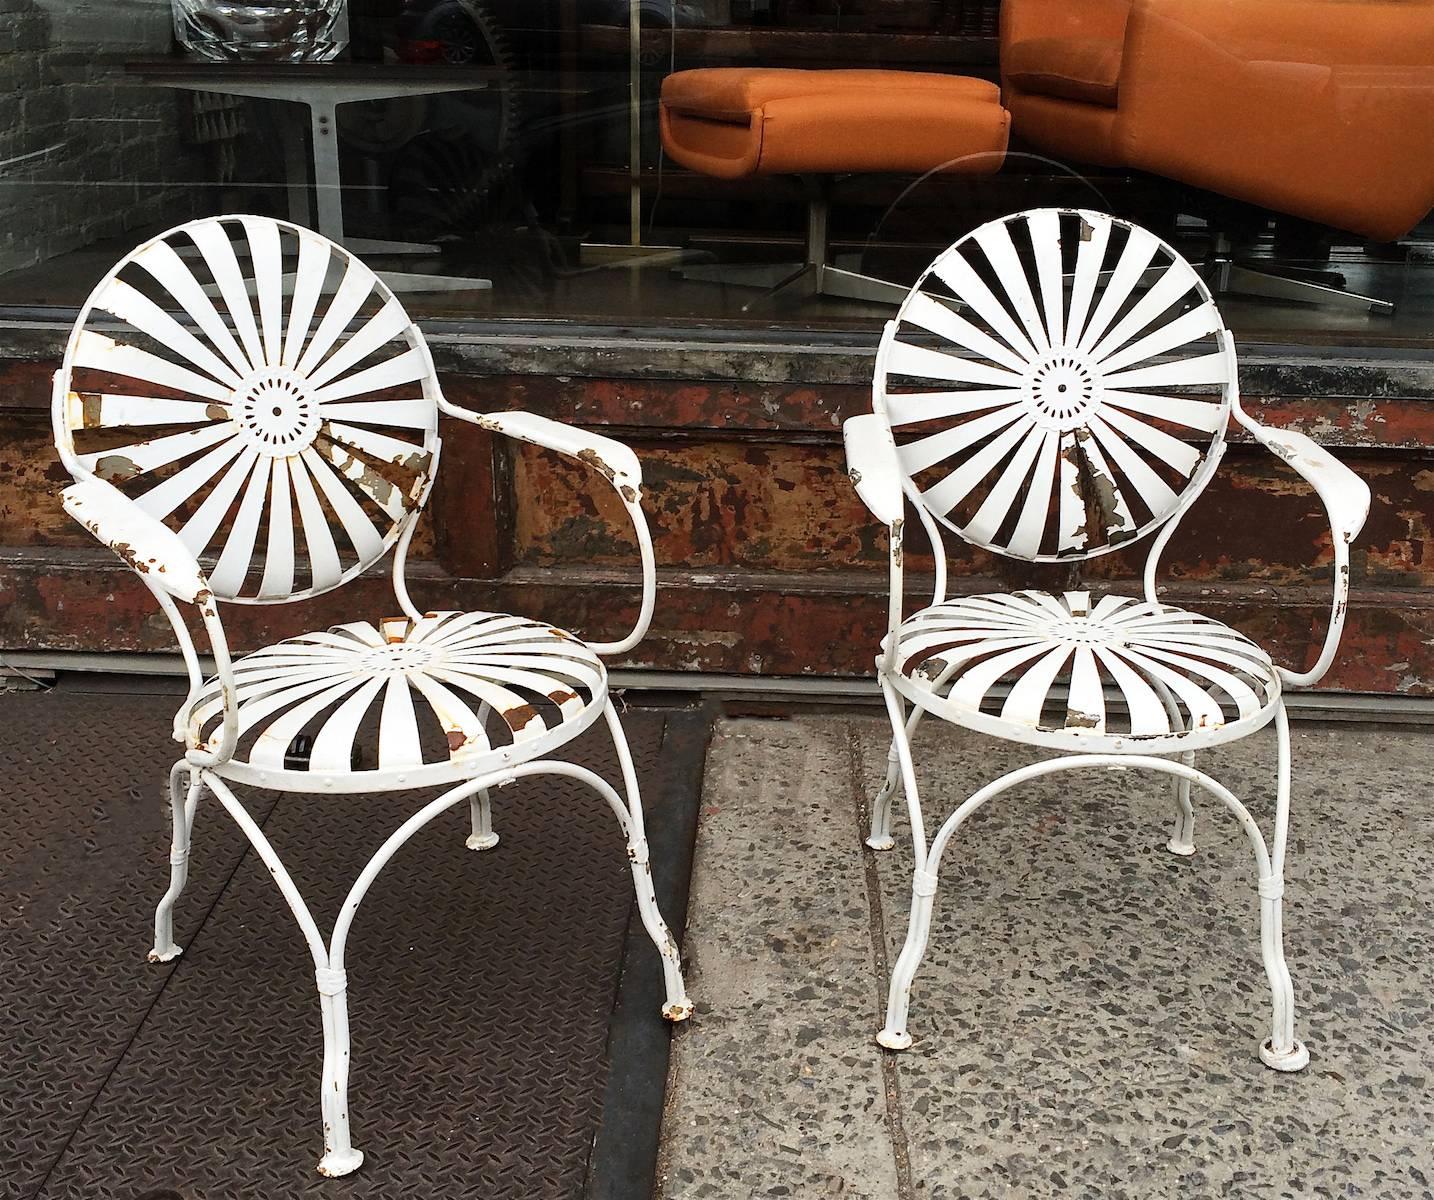 Pair of painted steel, French, garden armchairs by Francois Carré with sunburst seats and backs in original, rustic 